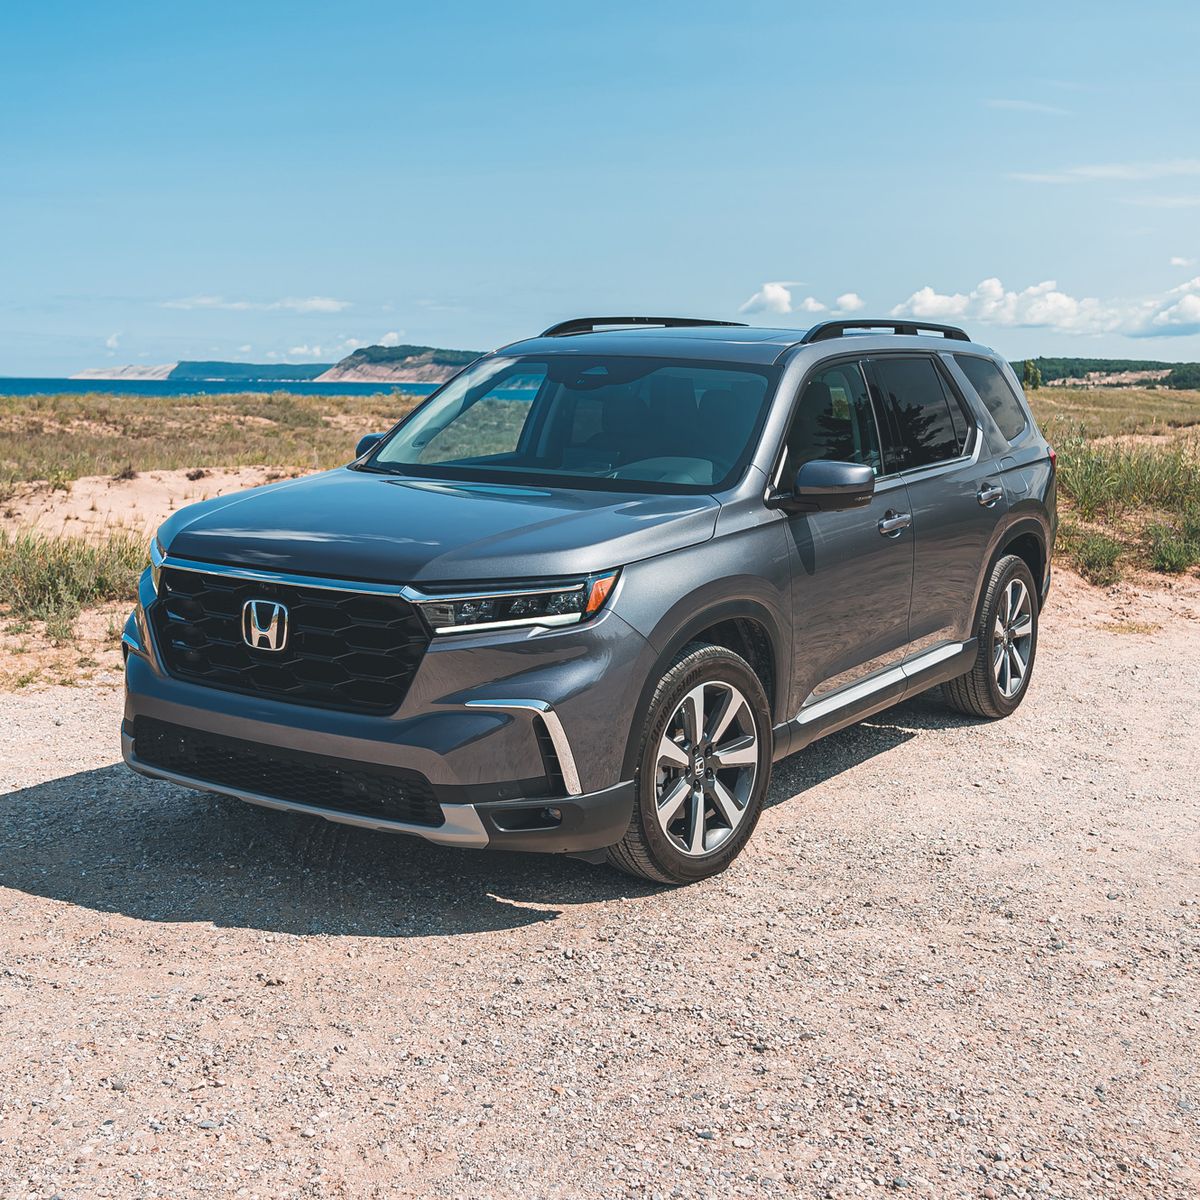 Honda Pilot Elite Tested: Birds of a Feather Fly Together